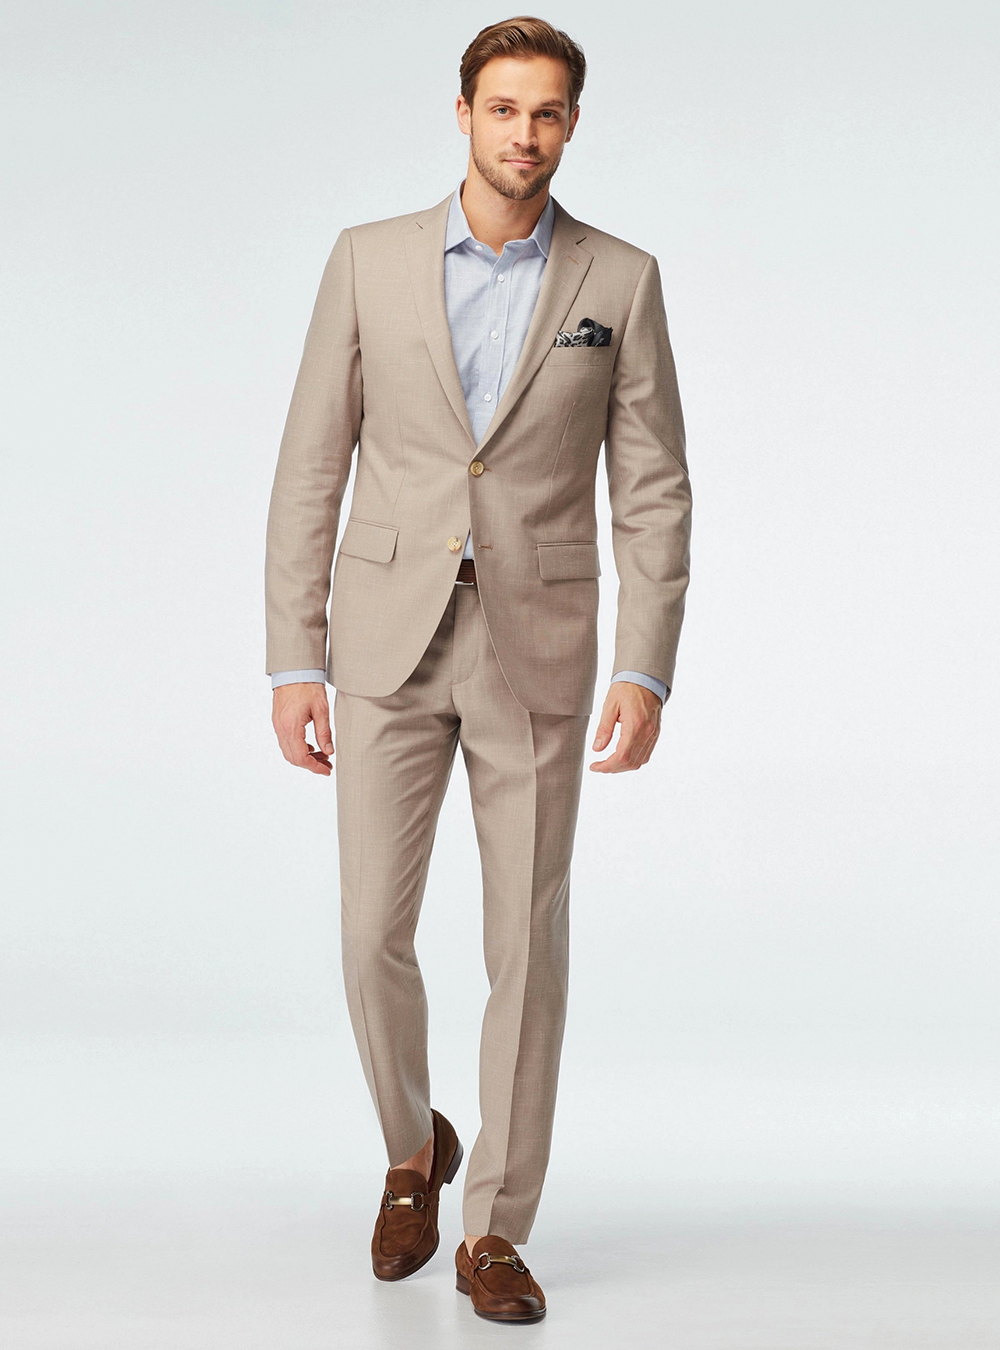 Tan suit, light blue dress shirt and brown loafers